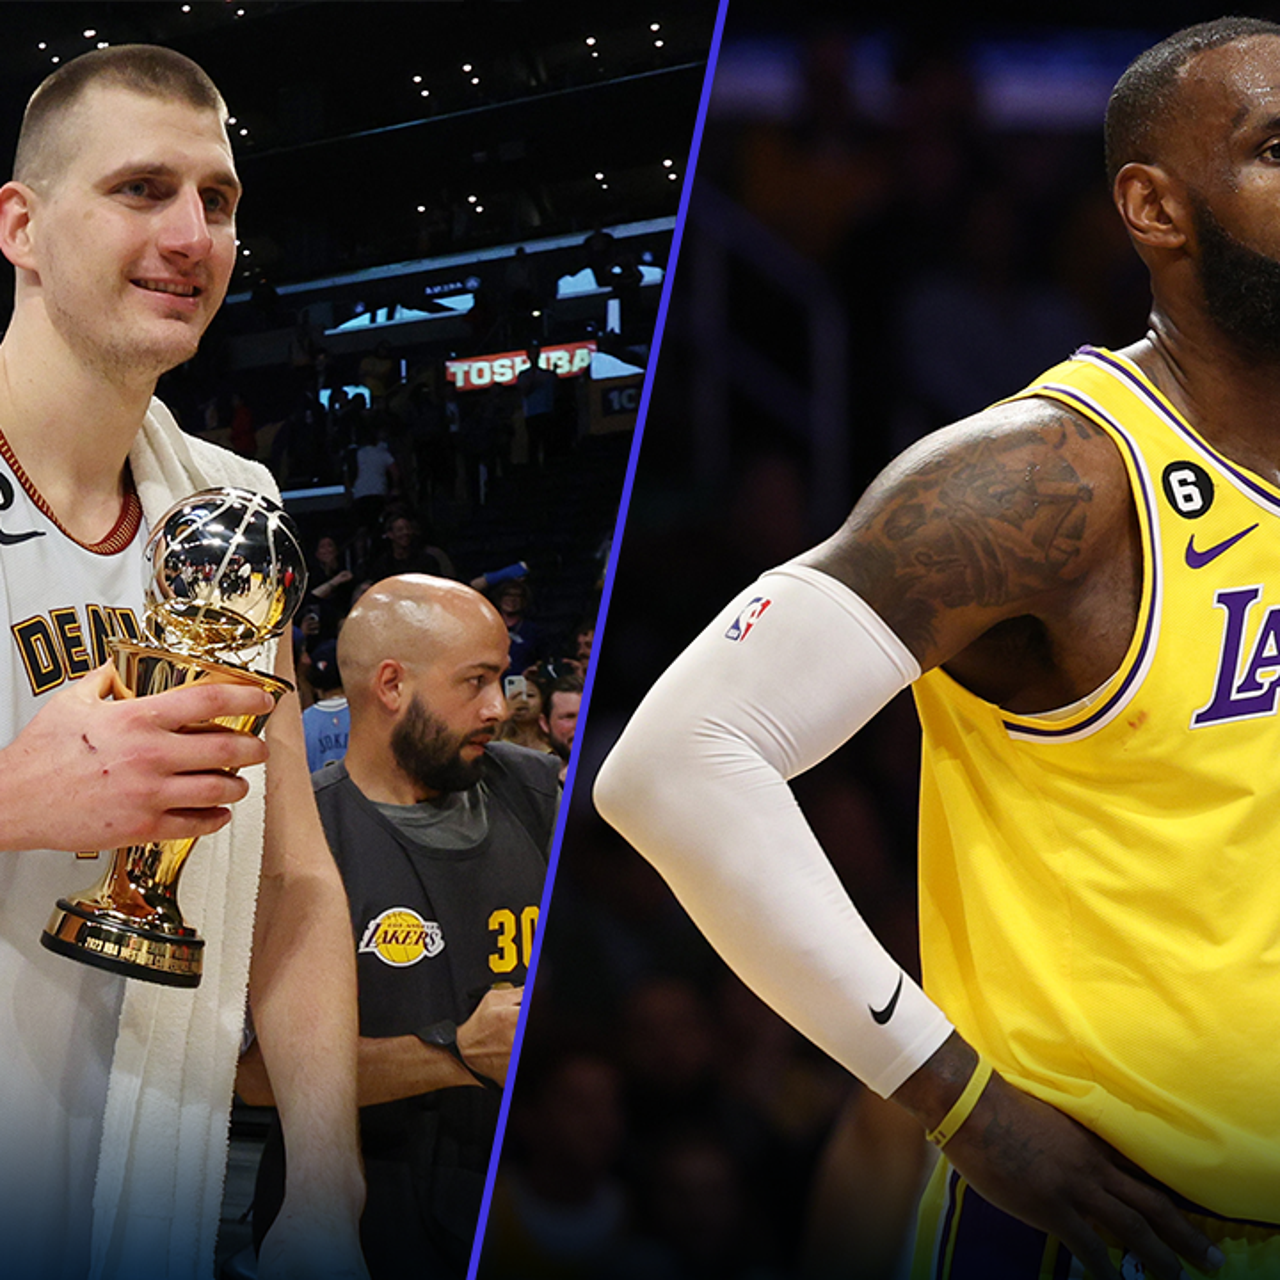 Nuggets sweep LeBron, Lakers and will head to franchise's first NBA Finals